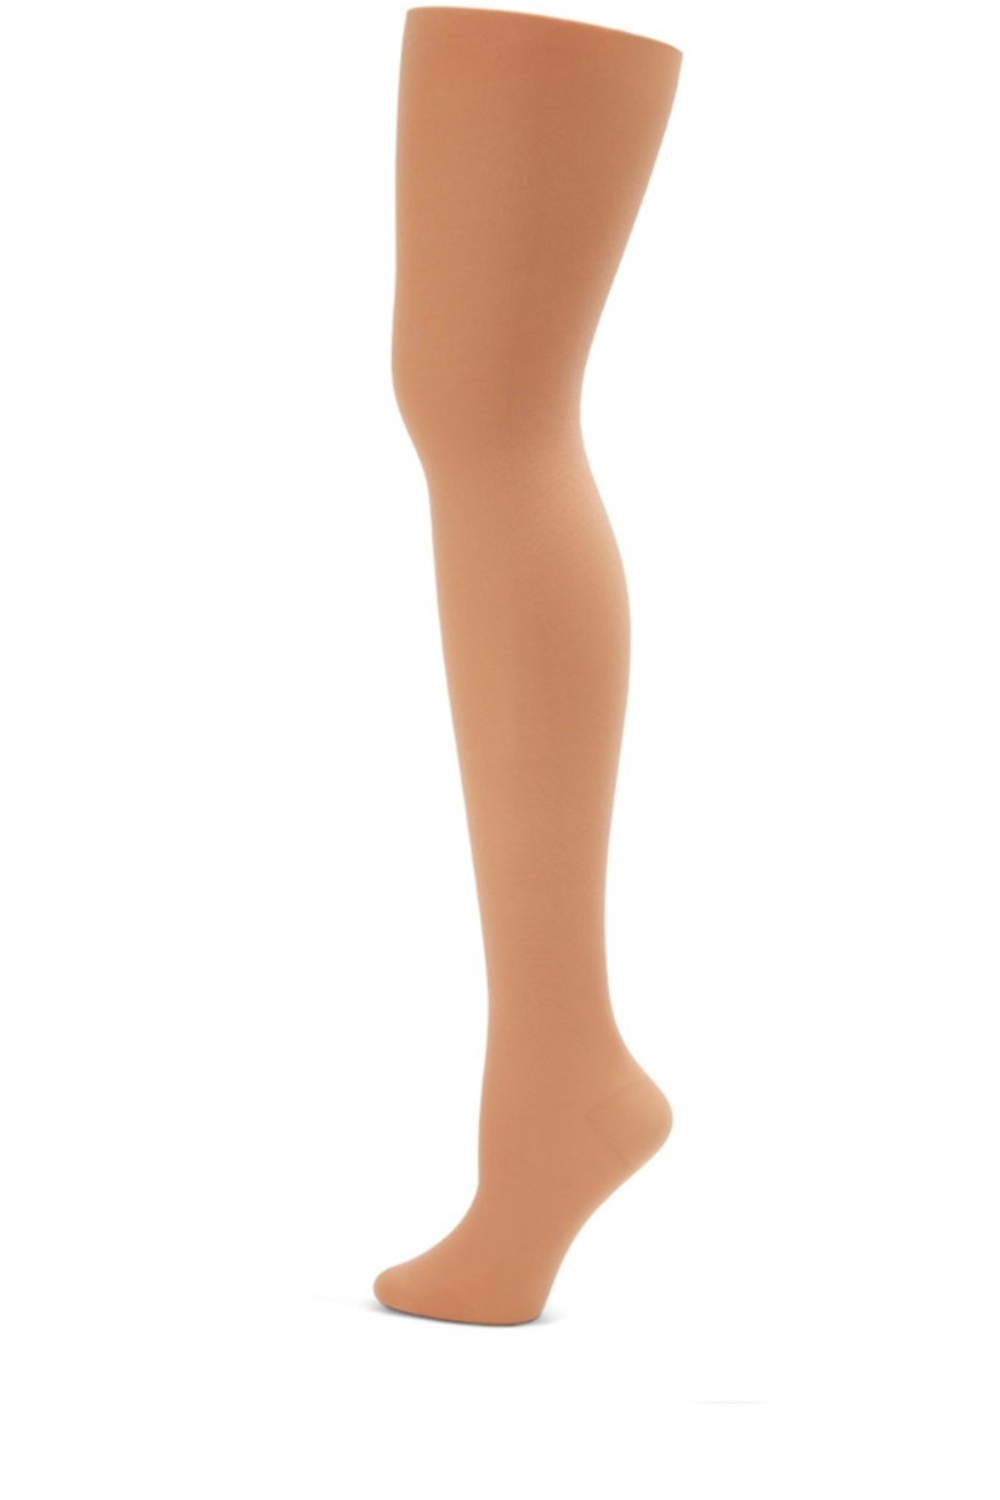 CAPEZIO N14 HOLD & STRETCH FOOTED TIGHT